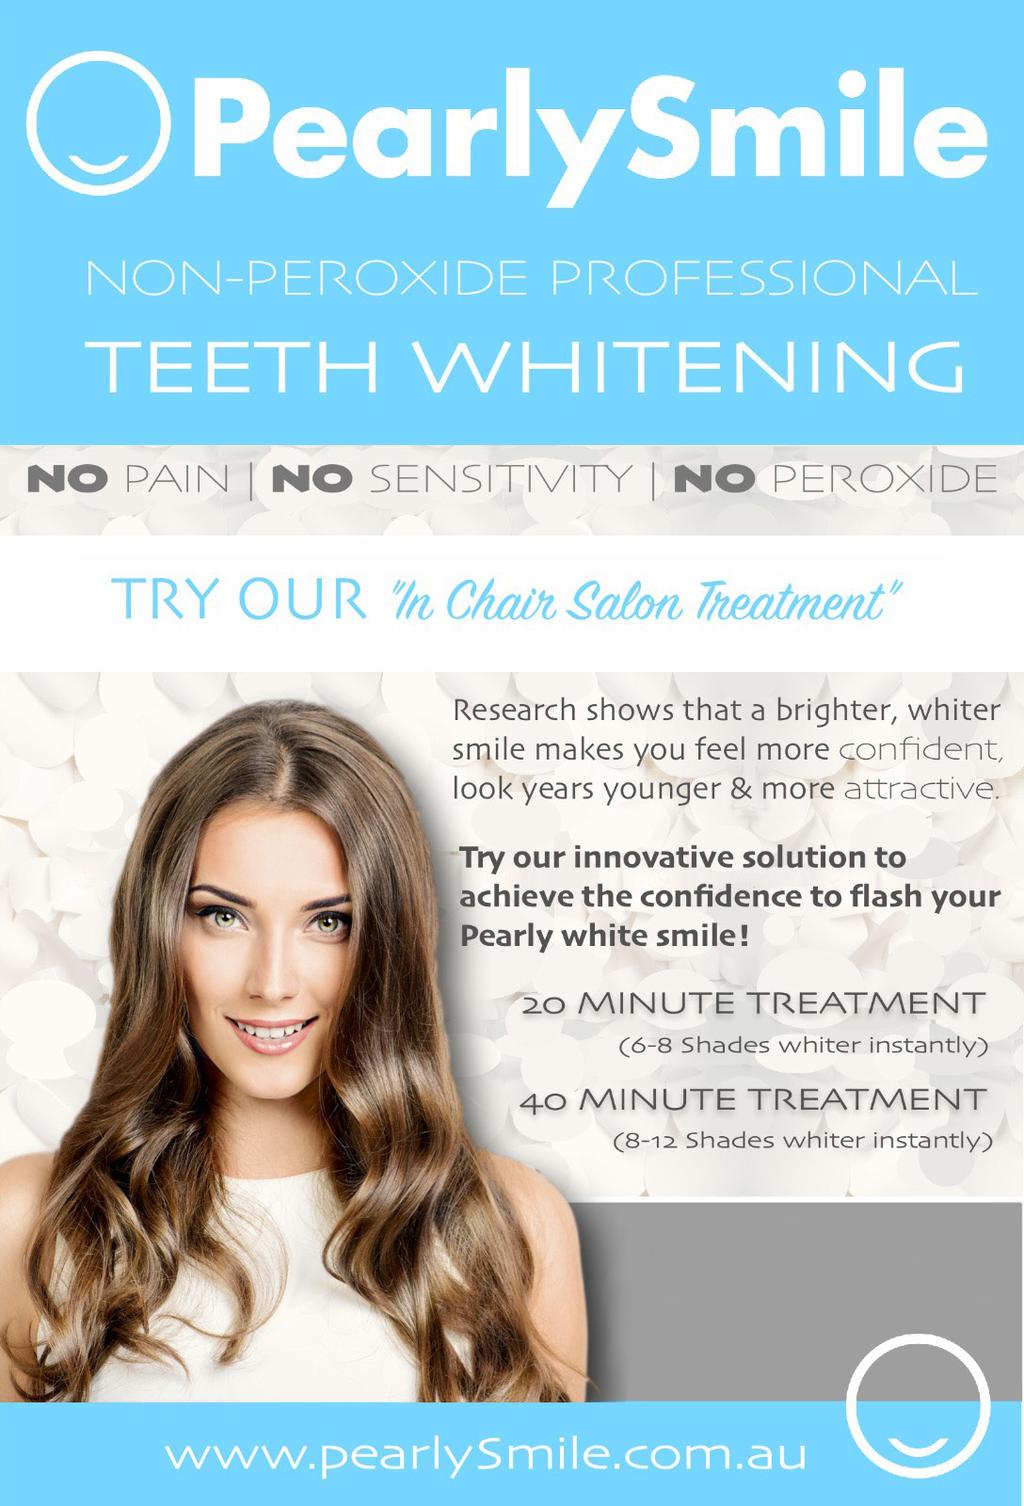 TEETH WHITENING For the past 20 years or more the teeth whitening market has progressed dramatically with sophisticated inclinic treatments and various home products.